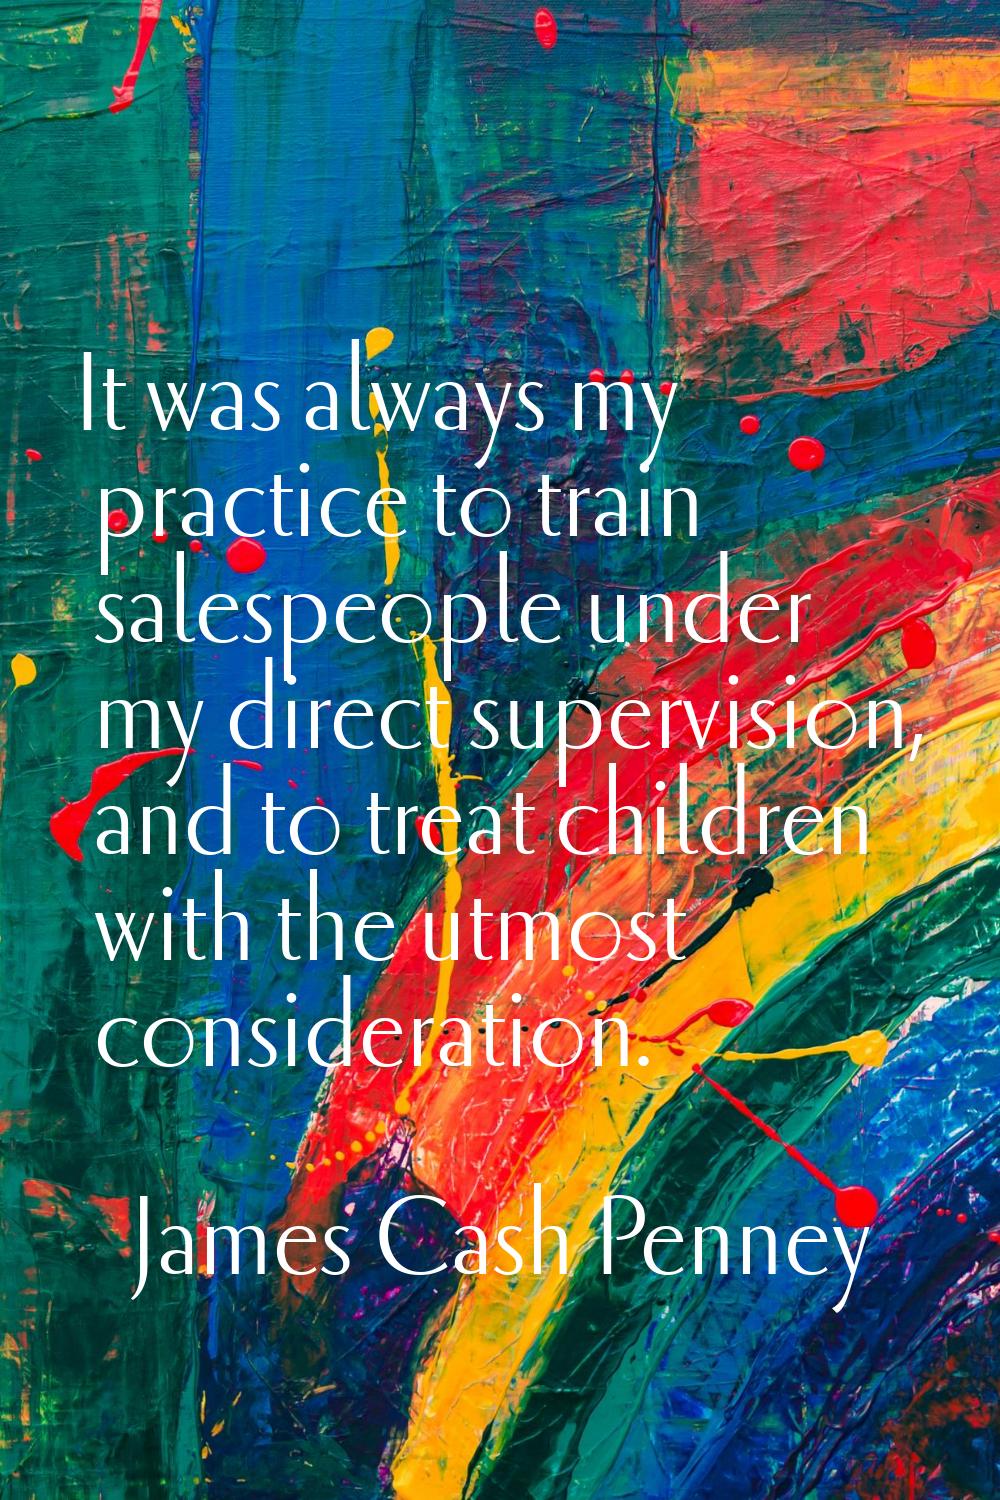 It was always my practice to train salespeople under my direct supervision, and to treat children w